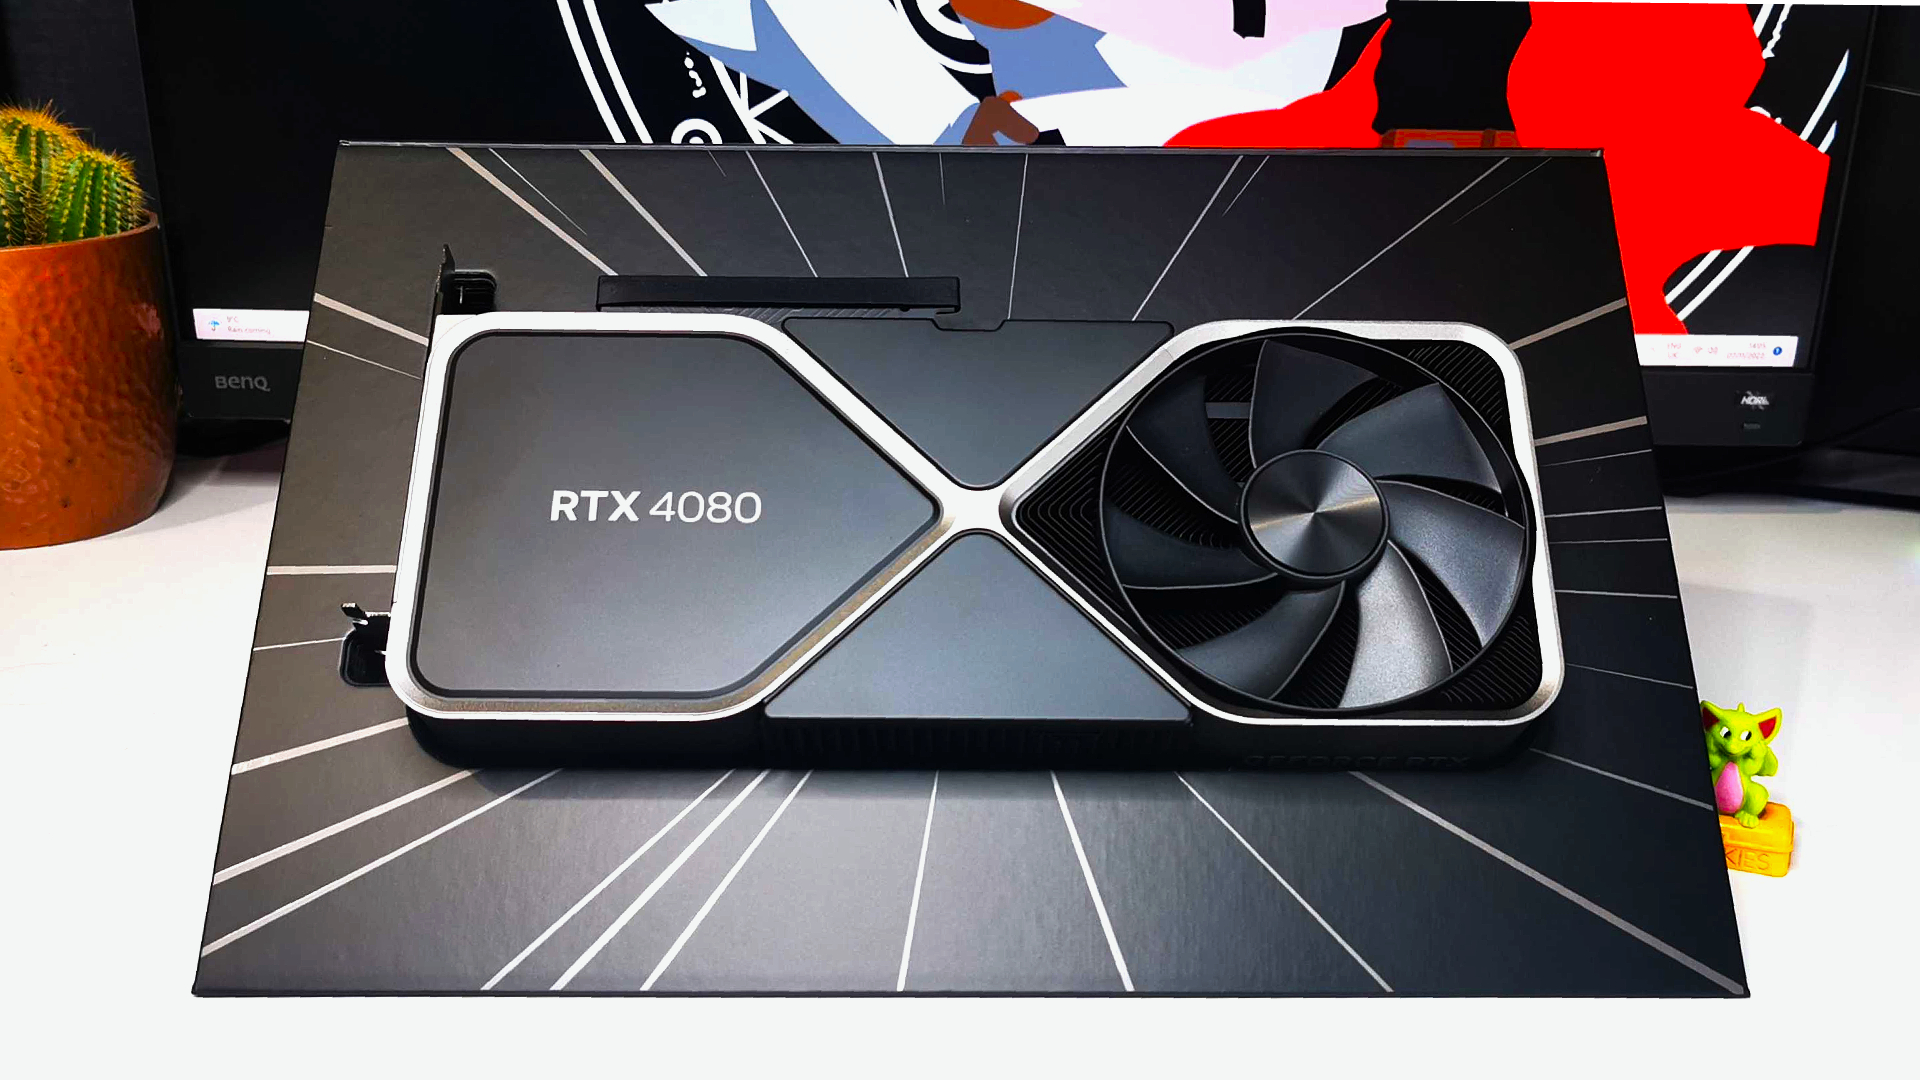 Nvidia GeForce RTX 4080 Review